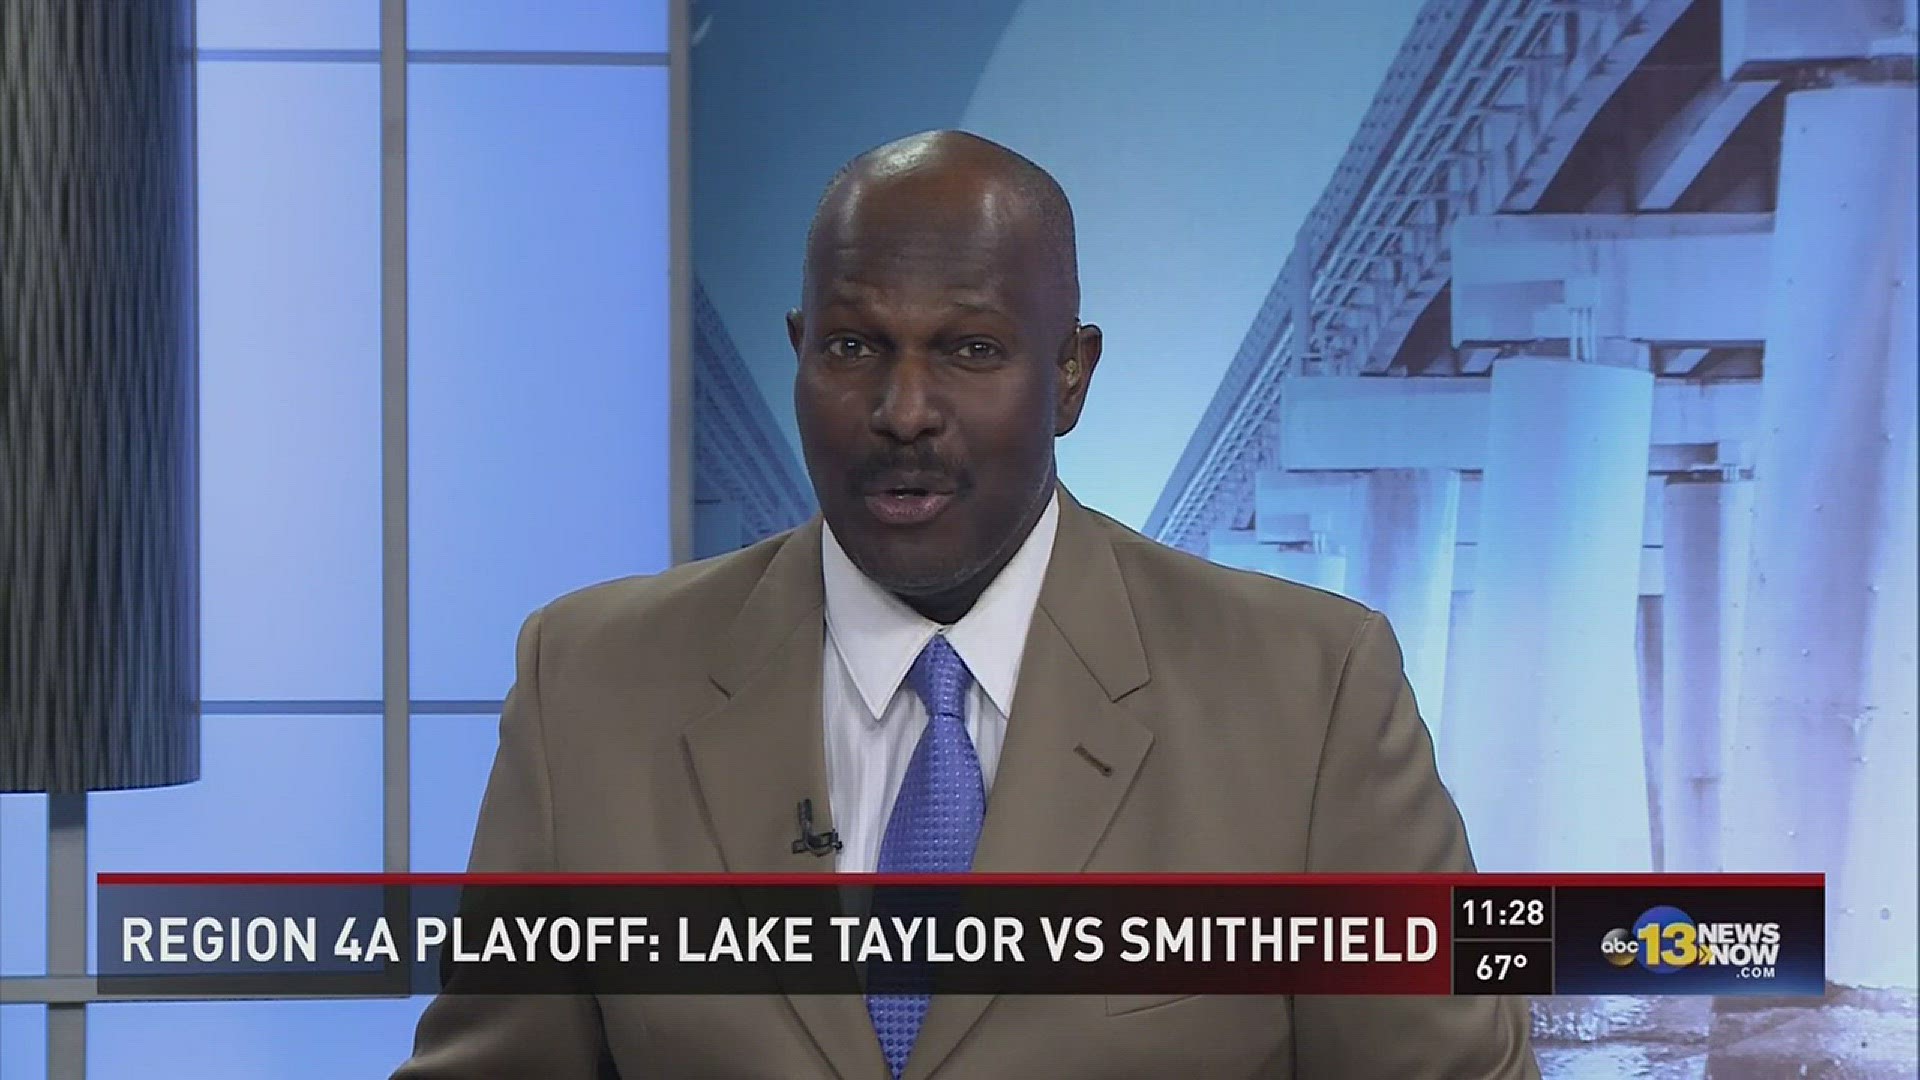 Lake Taylor got revenge over Smithfield in the 4A playoffs winning 86-47 while Hampton had no problems in the 5A playoffs beating Kecoughtan 58-39.